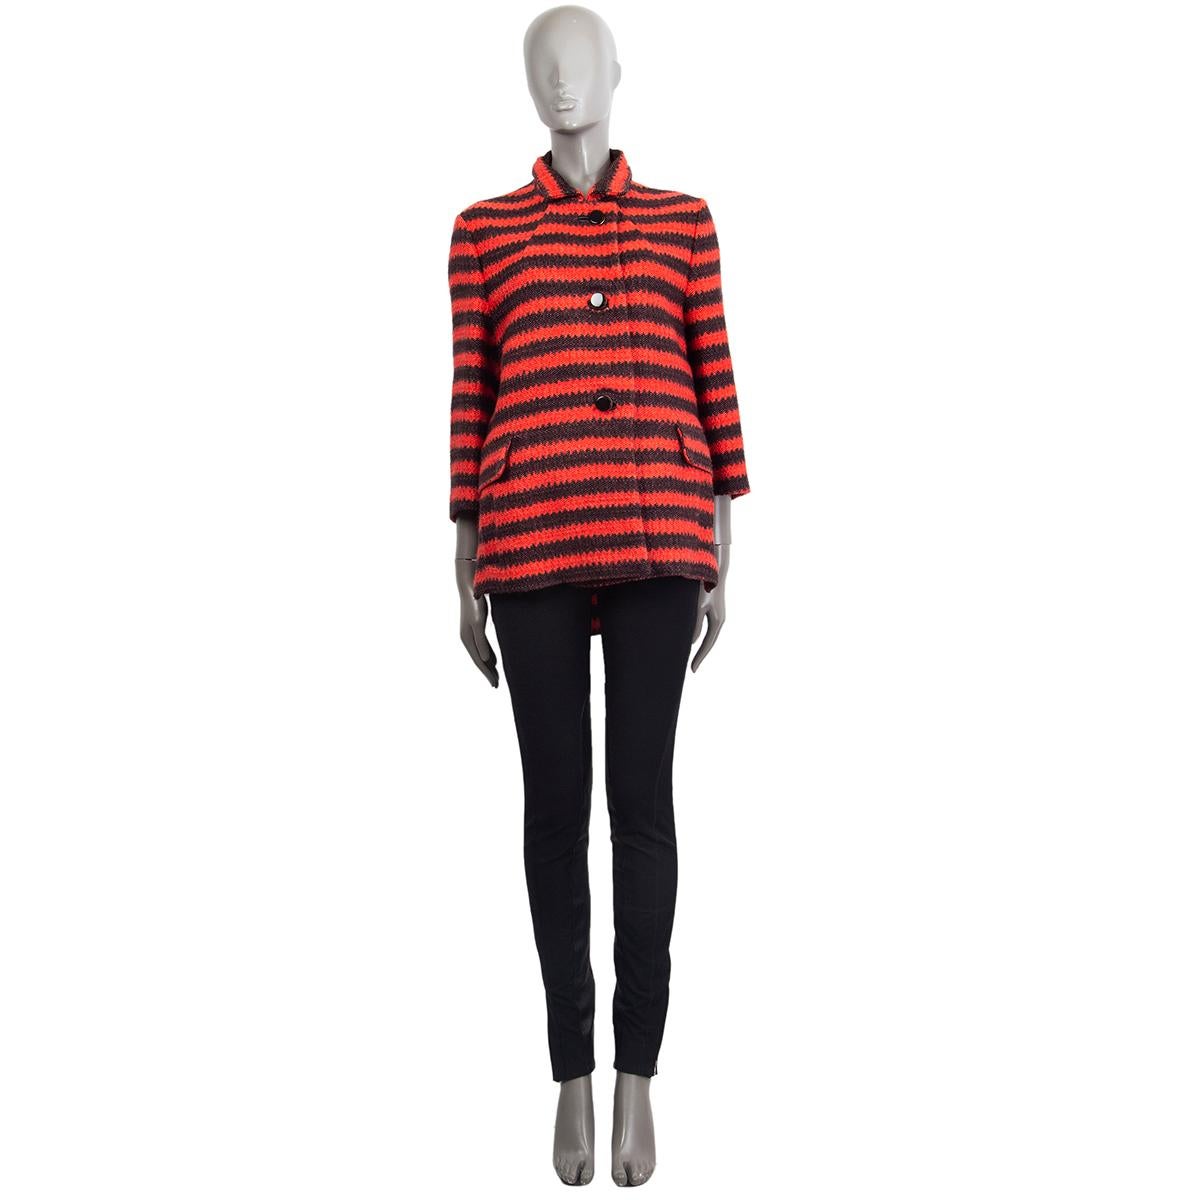 100% authentic Marni 3/4 sleeve striped knit coat in black and coral wool (74%), viscose (23%) and polyamide (3%) with front pockets. Closes on the front with pockets. Lined in acetate (65%) and silk (35%). Has been worn and is in excellent